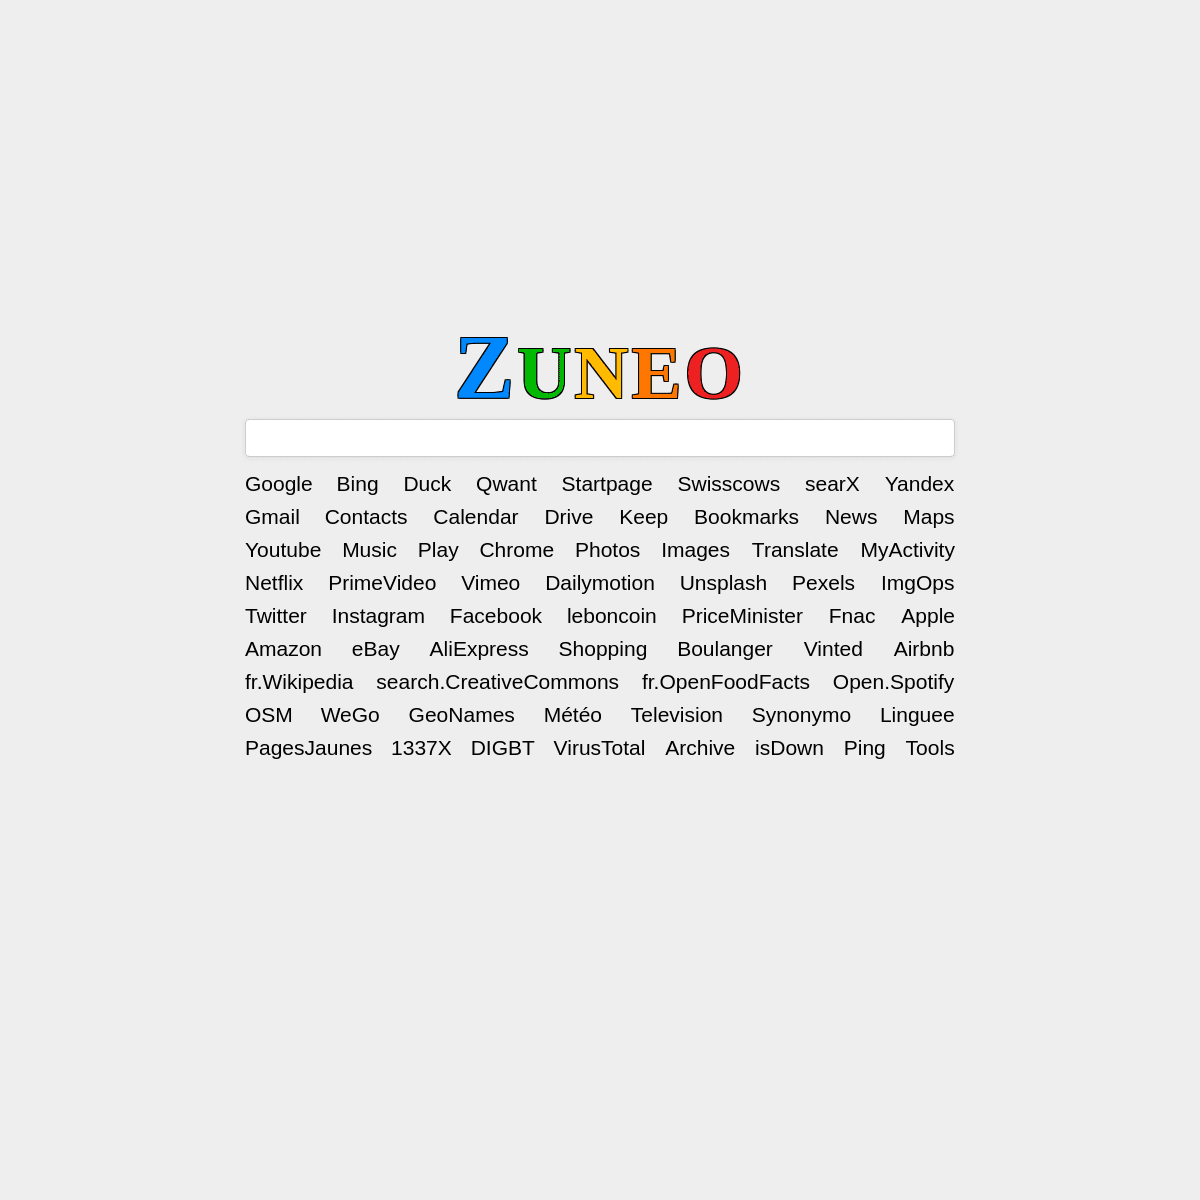 A complete backup of zuneo.fr